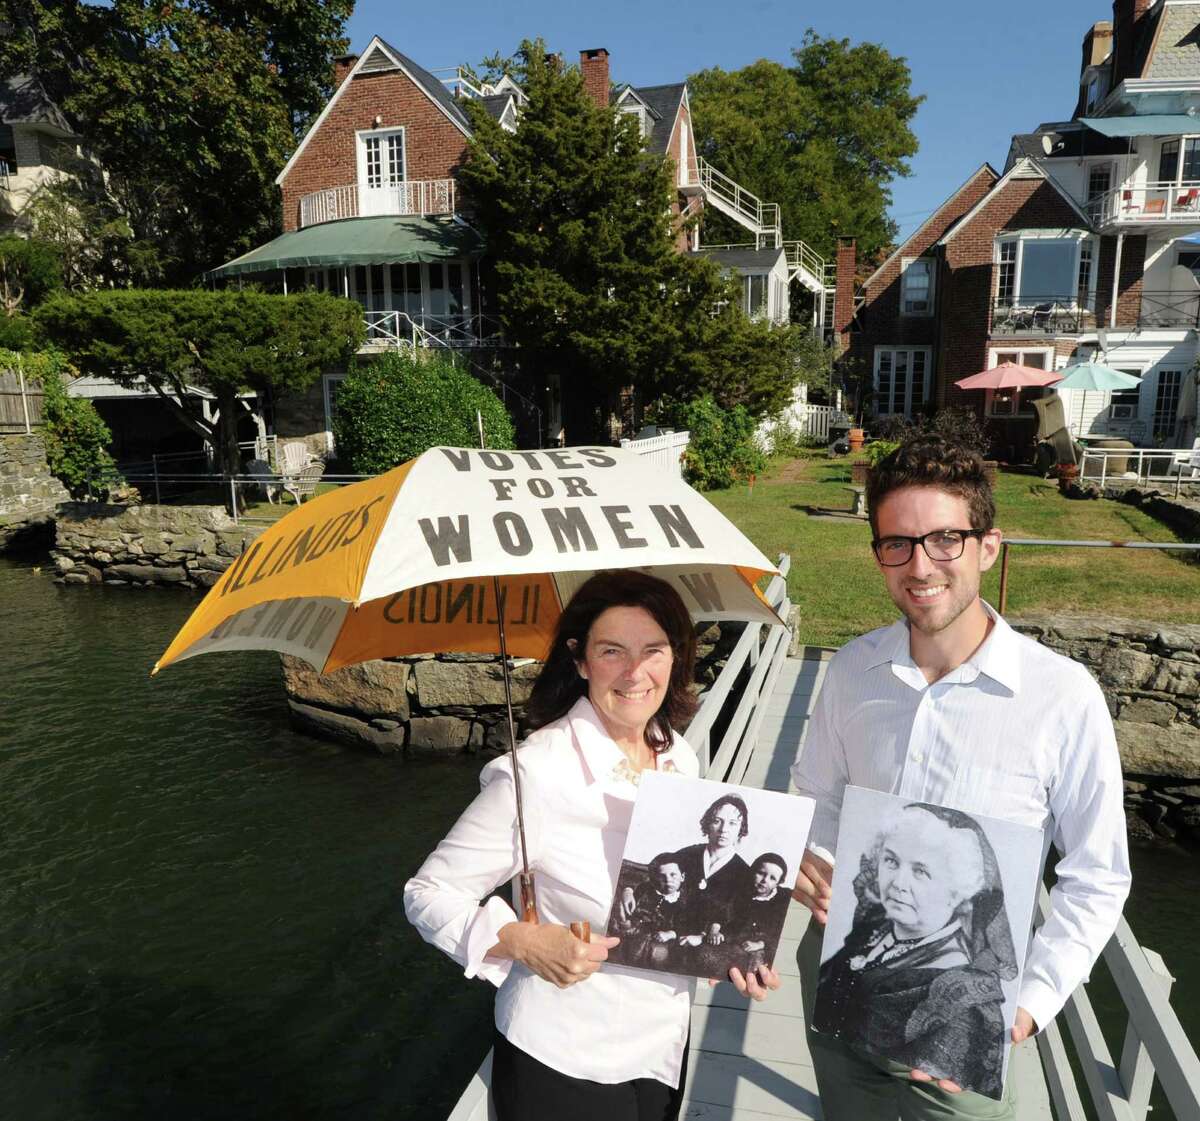 Holding a period umbrella calling for women’s right to vote, Coline Jenkins, the great-great-granddaughter of suffragist Elizabeth Cady Stanton, and her son, Eric Jenkins-Sahlin, display photos of their famous ancestor at their home, at left, in Greenwich.